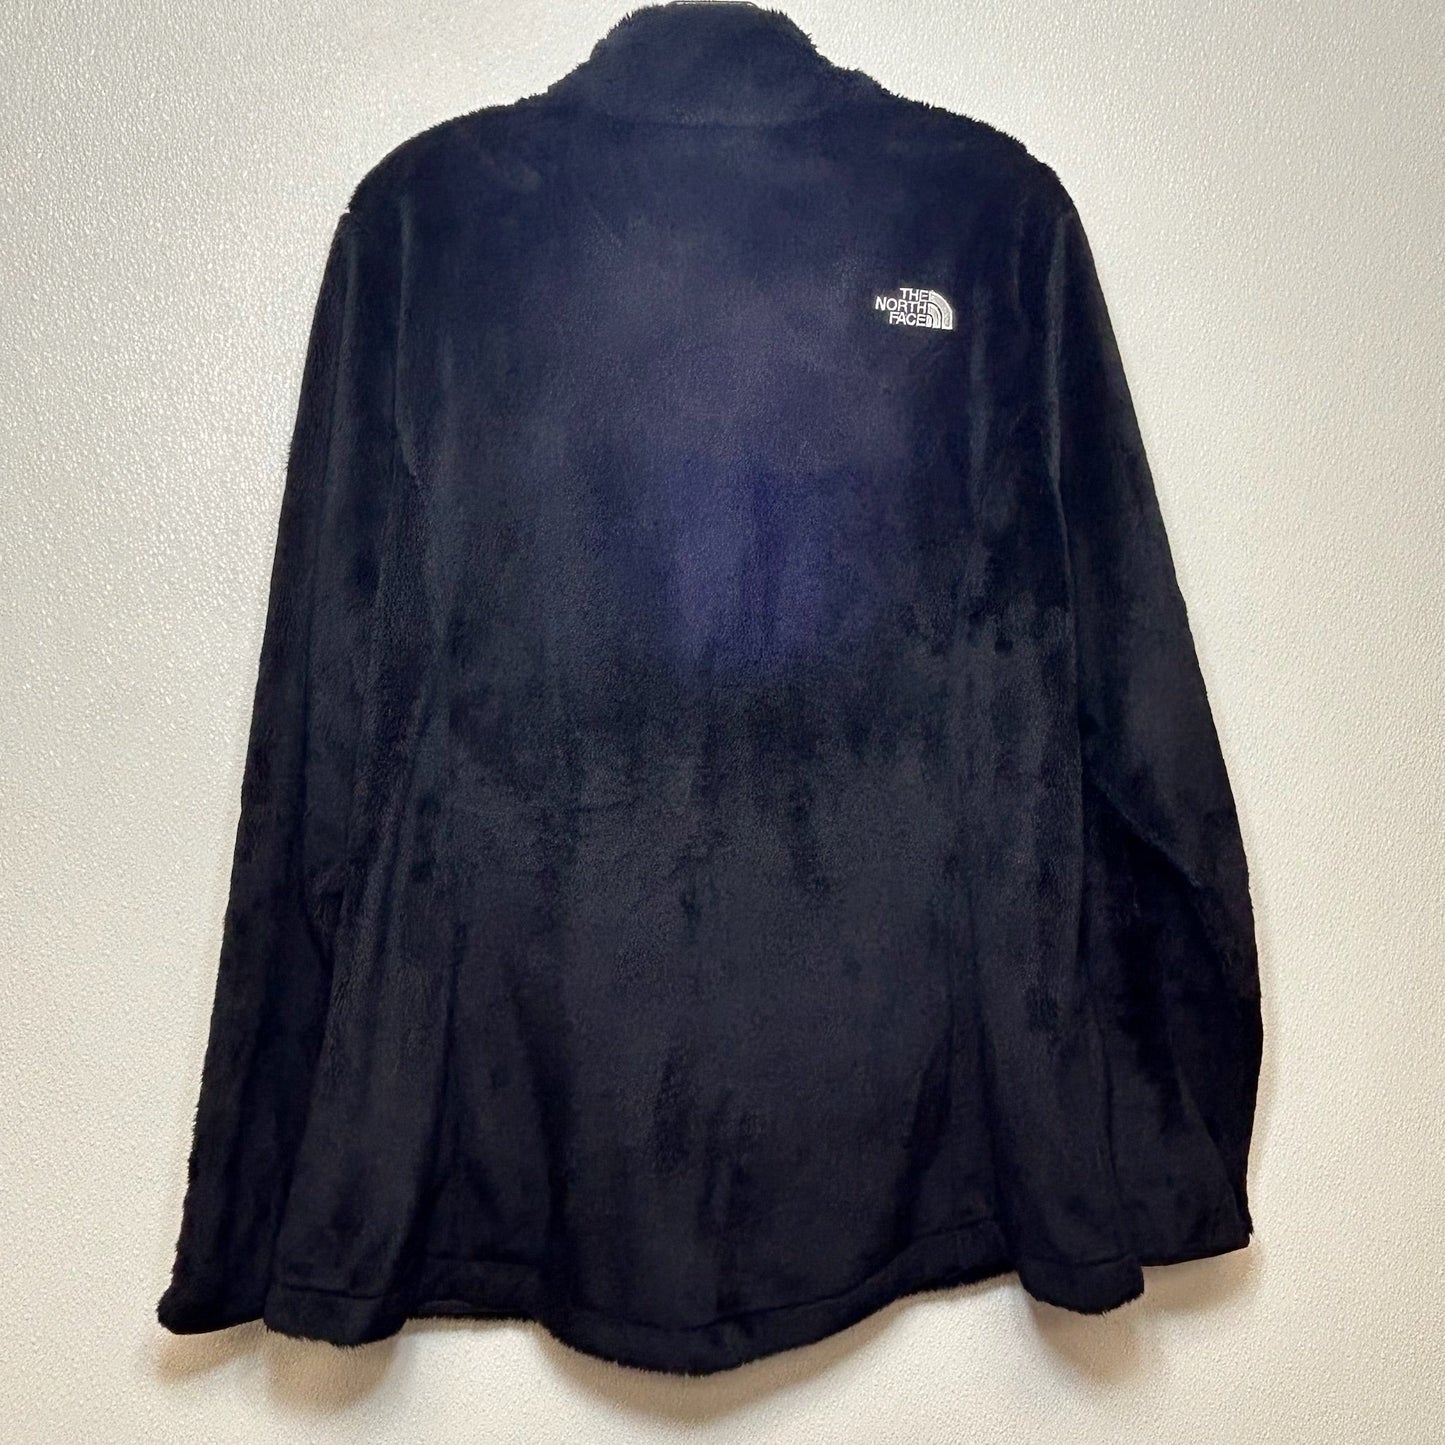 Black Jacket Other North Face, Size 1x